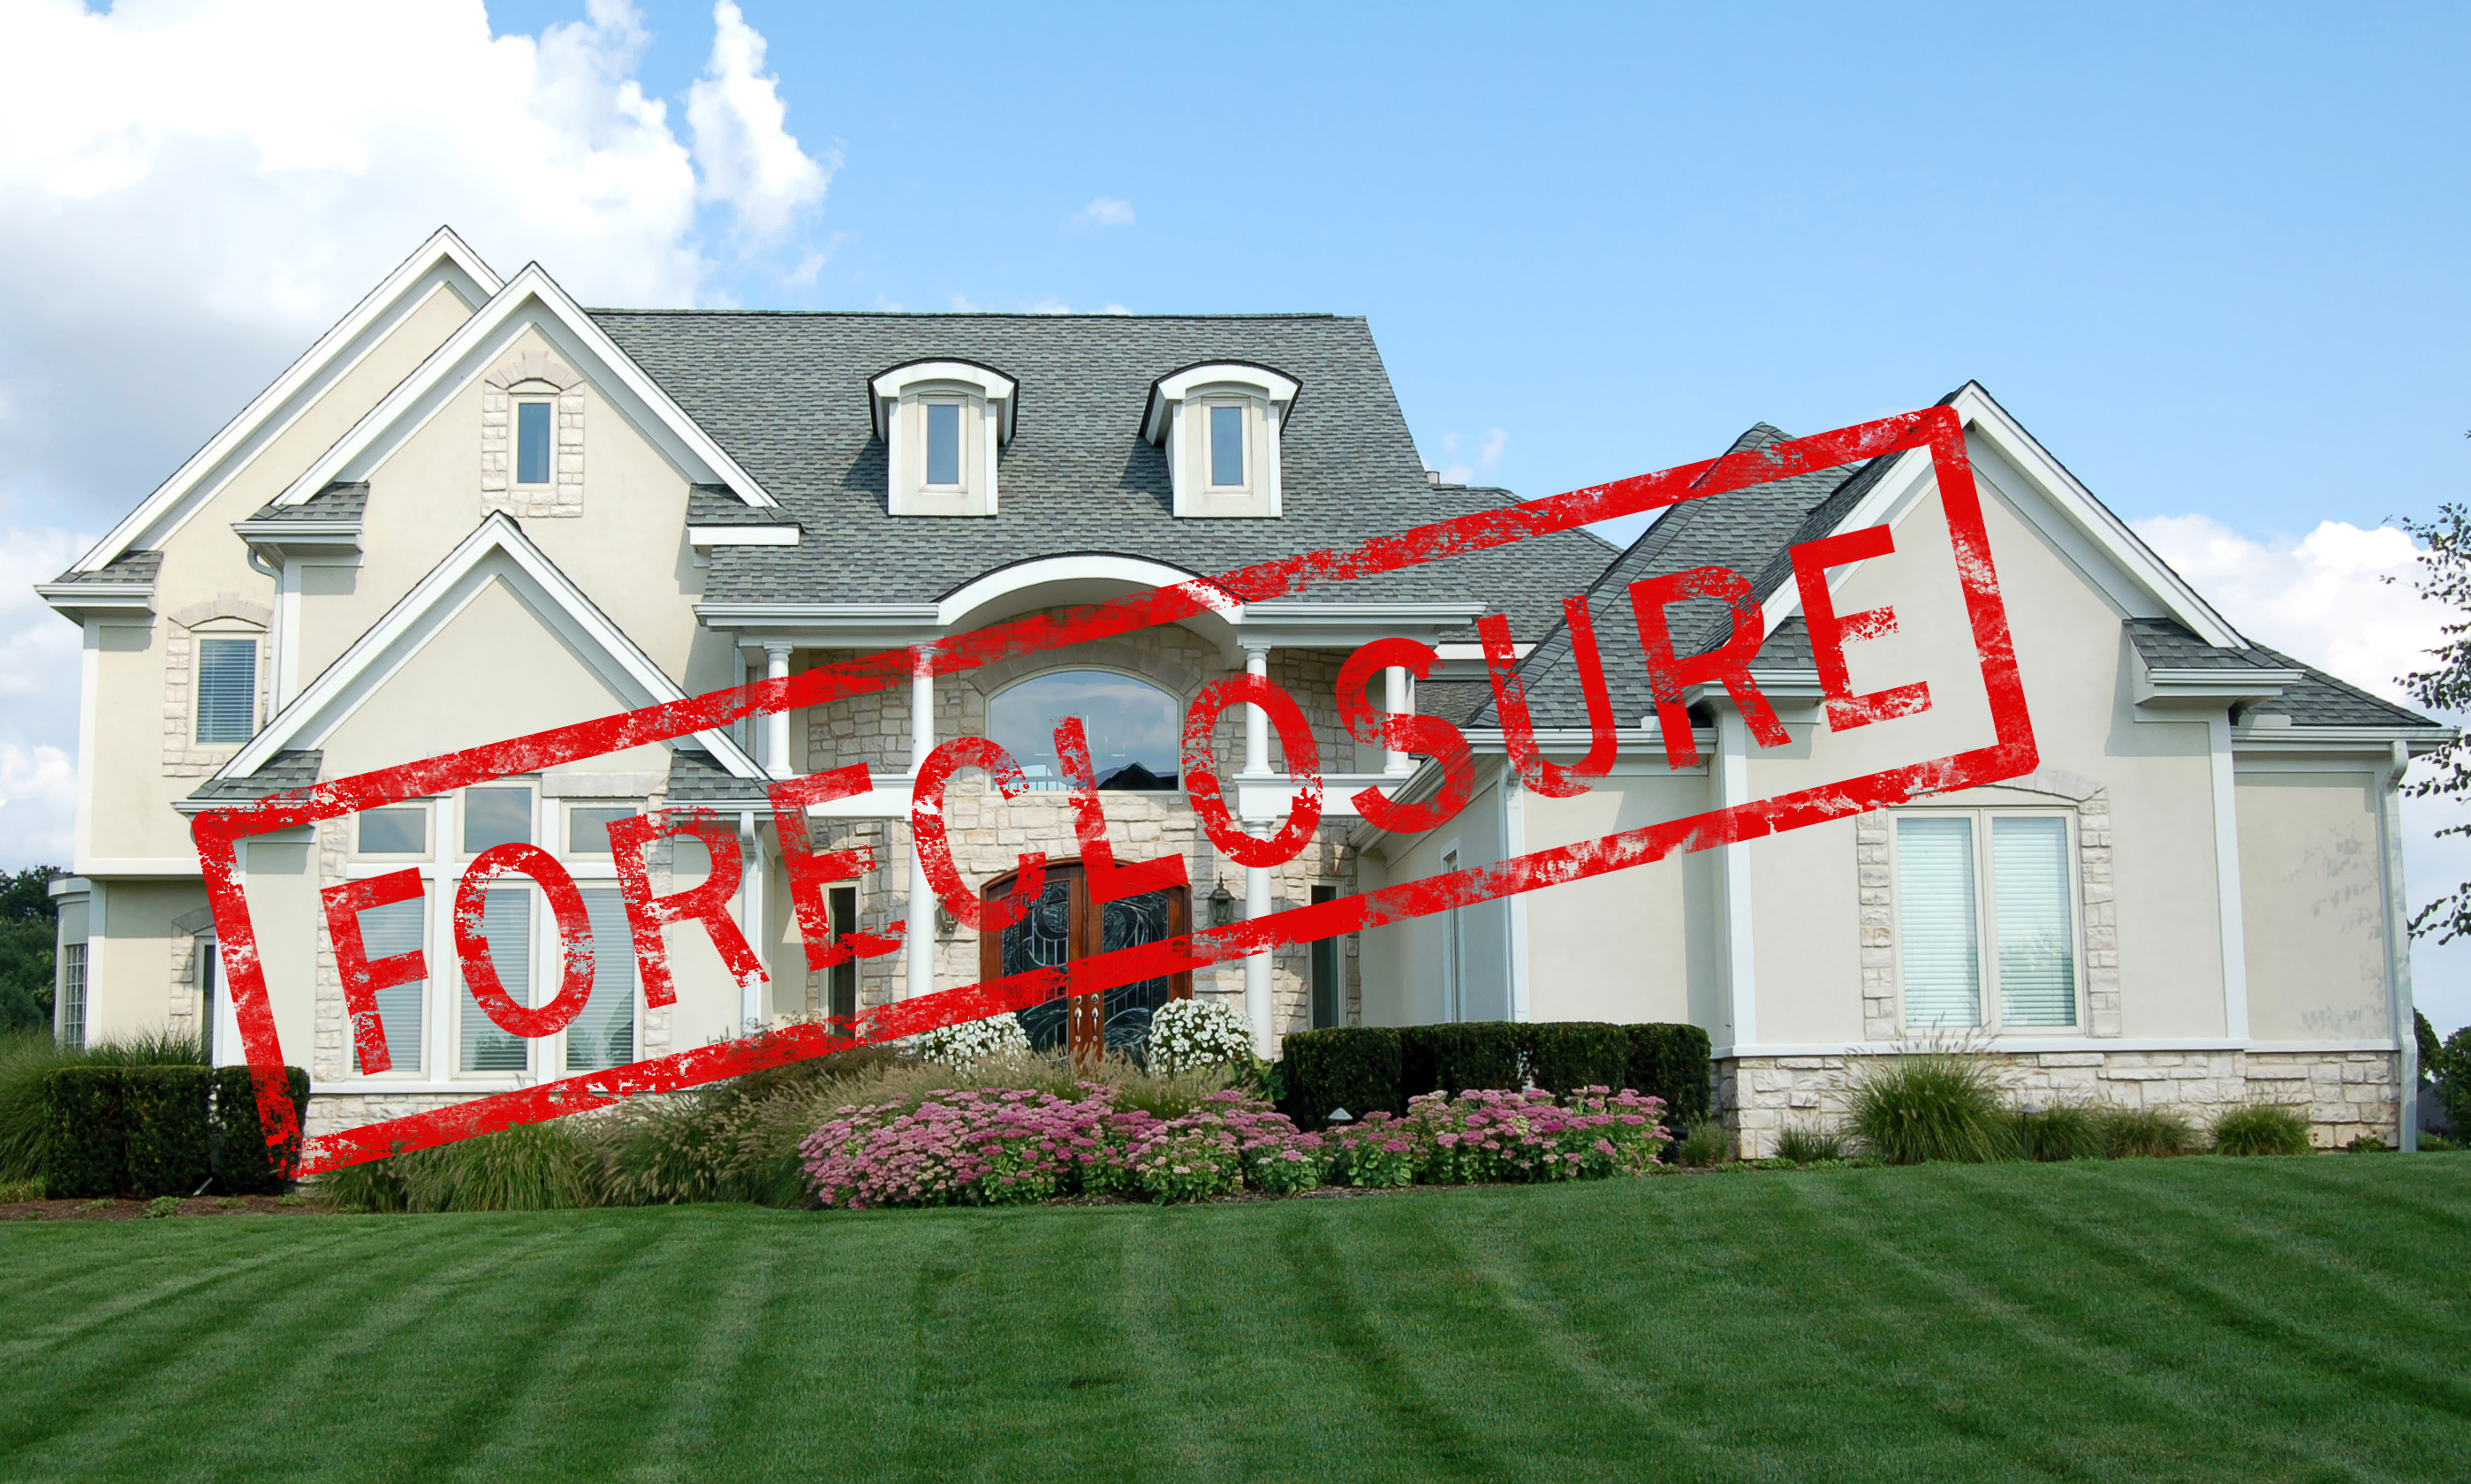 Call Palma-Lazar Appraisal to order valuations on Bucks foreclosures